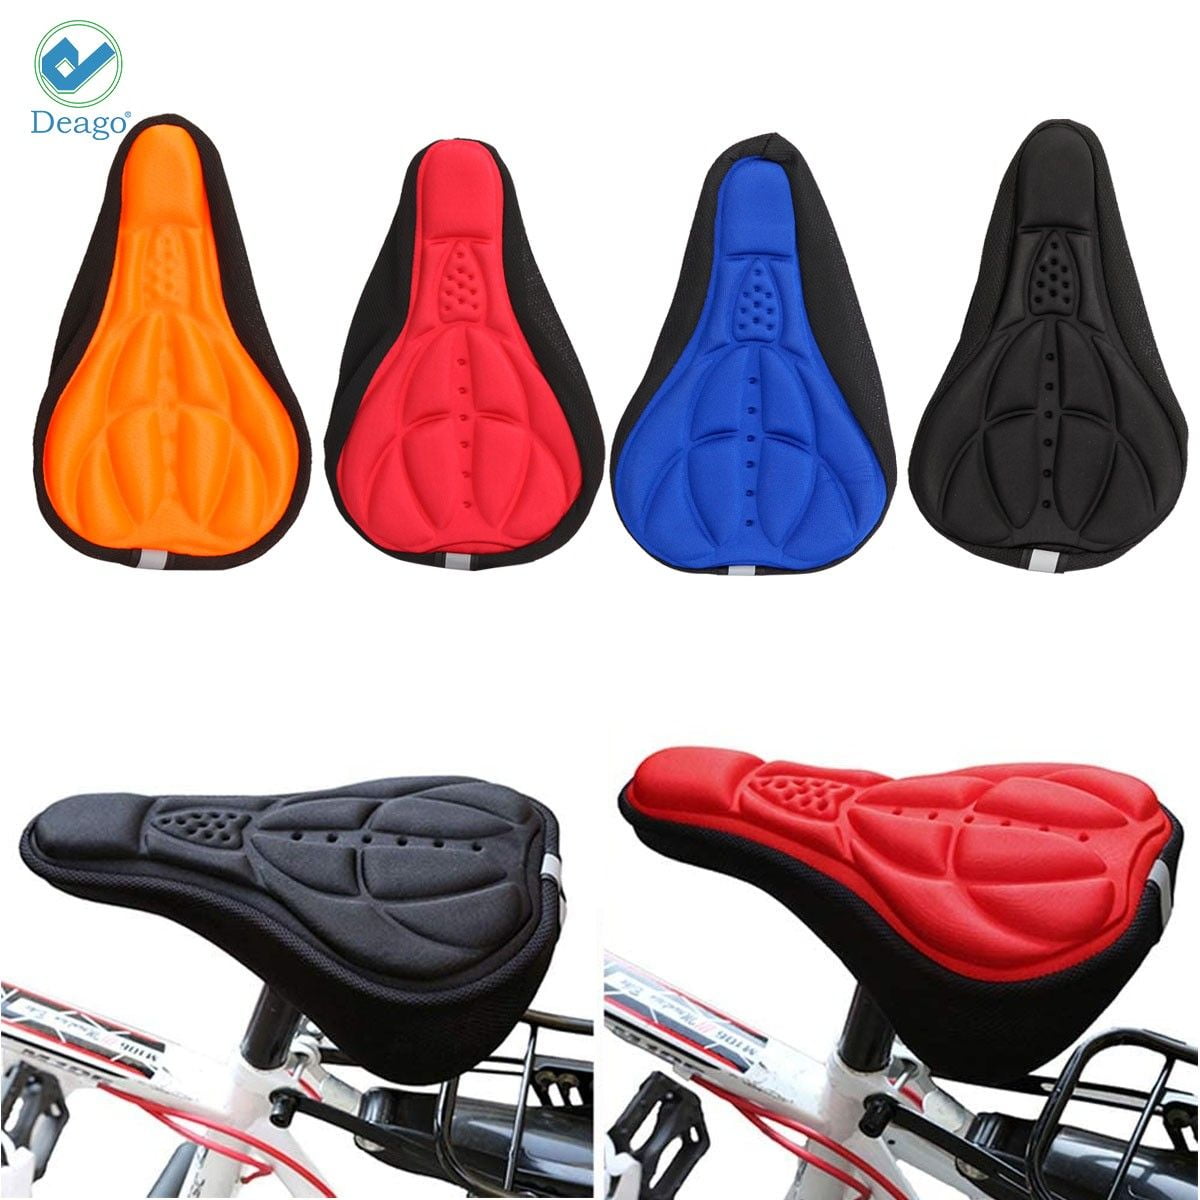 3D Silicone Soft Cycling Seat Saddle Gel Cushion Cover for City Road Bicycle Padded Bike Saddle Cover with Waterproof Saddle Cover Gel Bike Seat Cover Mountain Bike Saddle Cover for Men Women